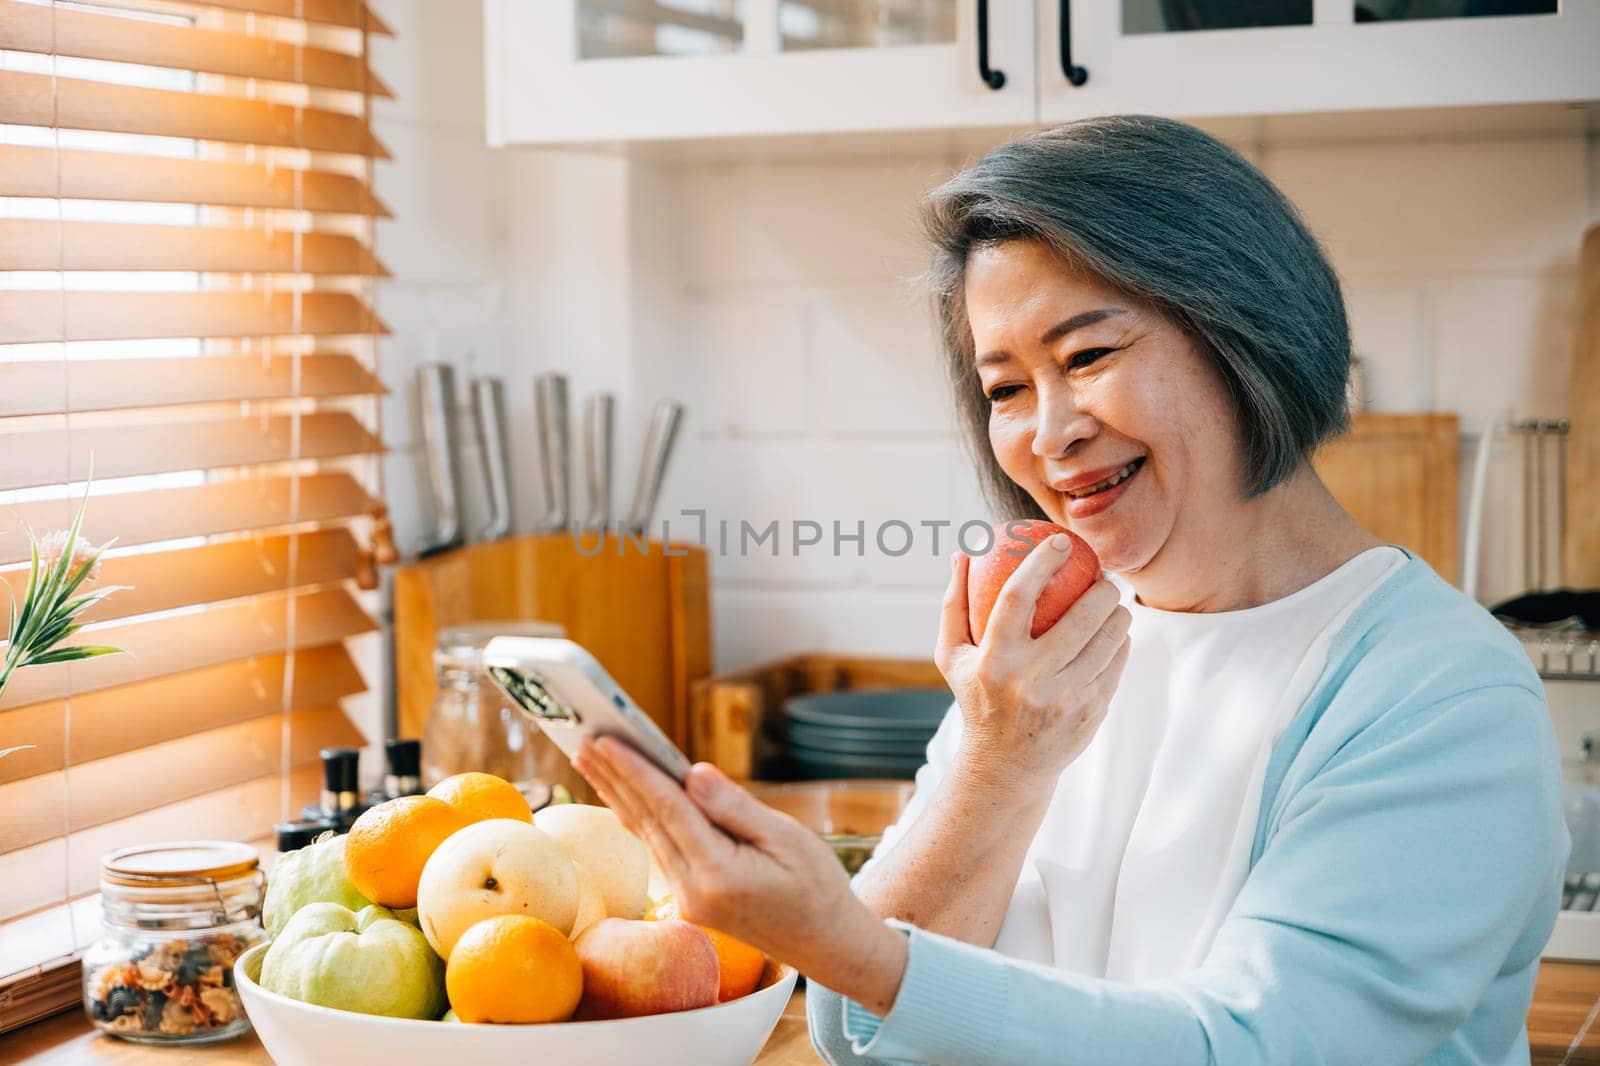 An old Asian woman, a grandmother, enjoys breakfast in the kitchen. She smiles while using her smartphone at home, eating a red apple. A portrait of modern technology and happiness. by Sorapop